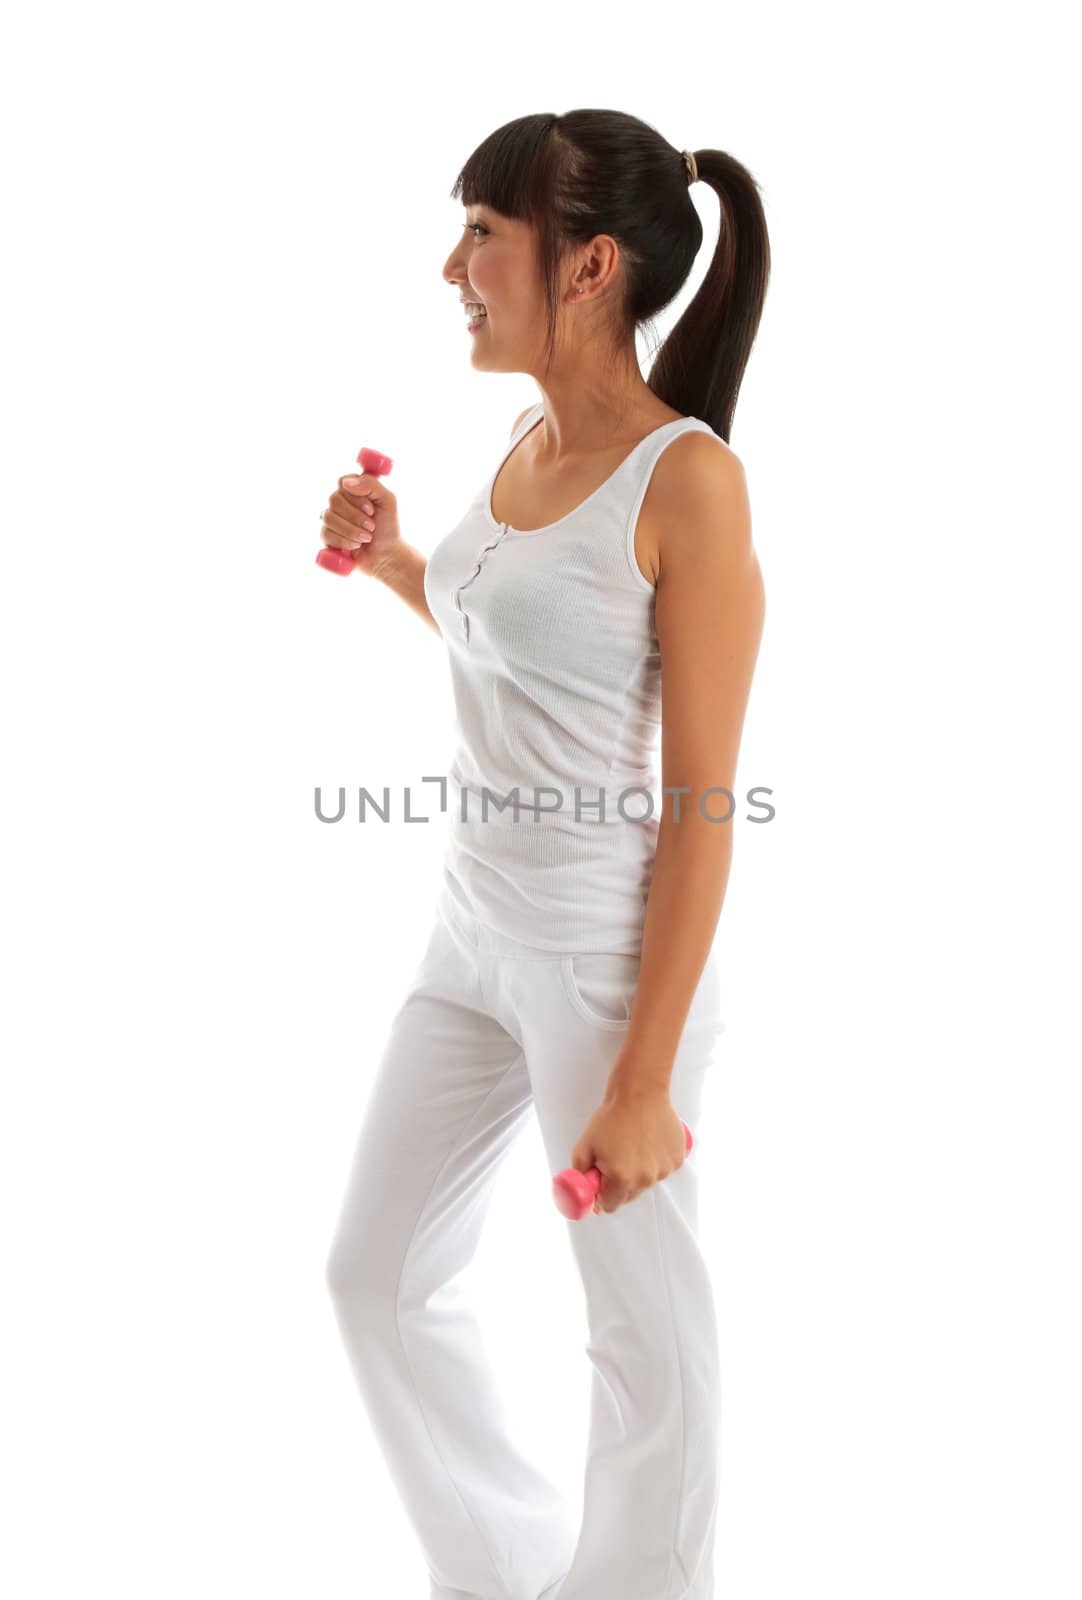 Beautiful young and happy girl exercising with hand weights to build muscle, firm and tone. She is wearing white pants and tank top.  There is motion in her hands and weights.  White background.

Model Jessica Elms, Makeup Hanae Satomura, Hair by Kayla Cifelli